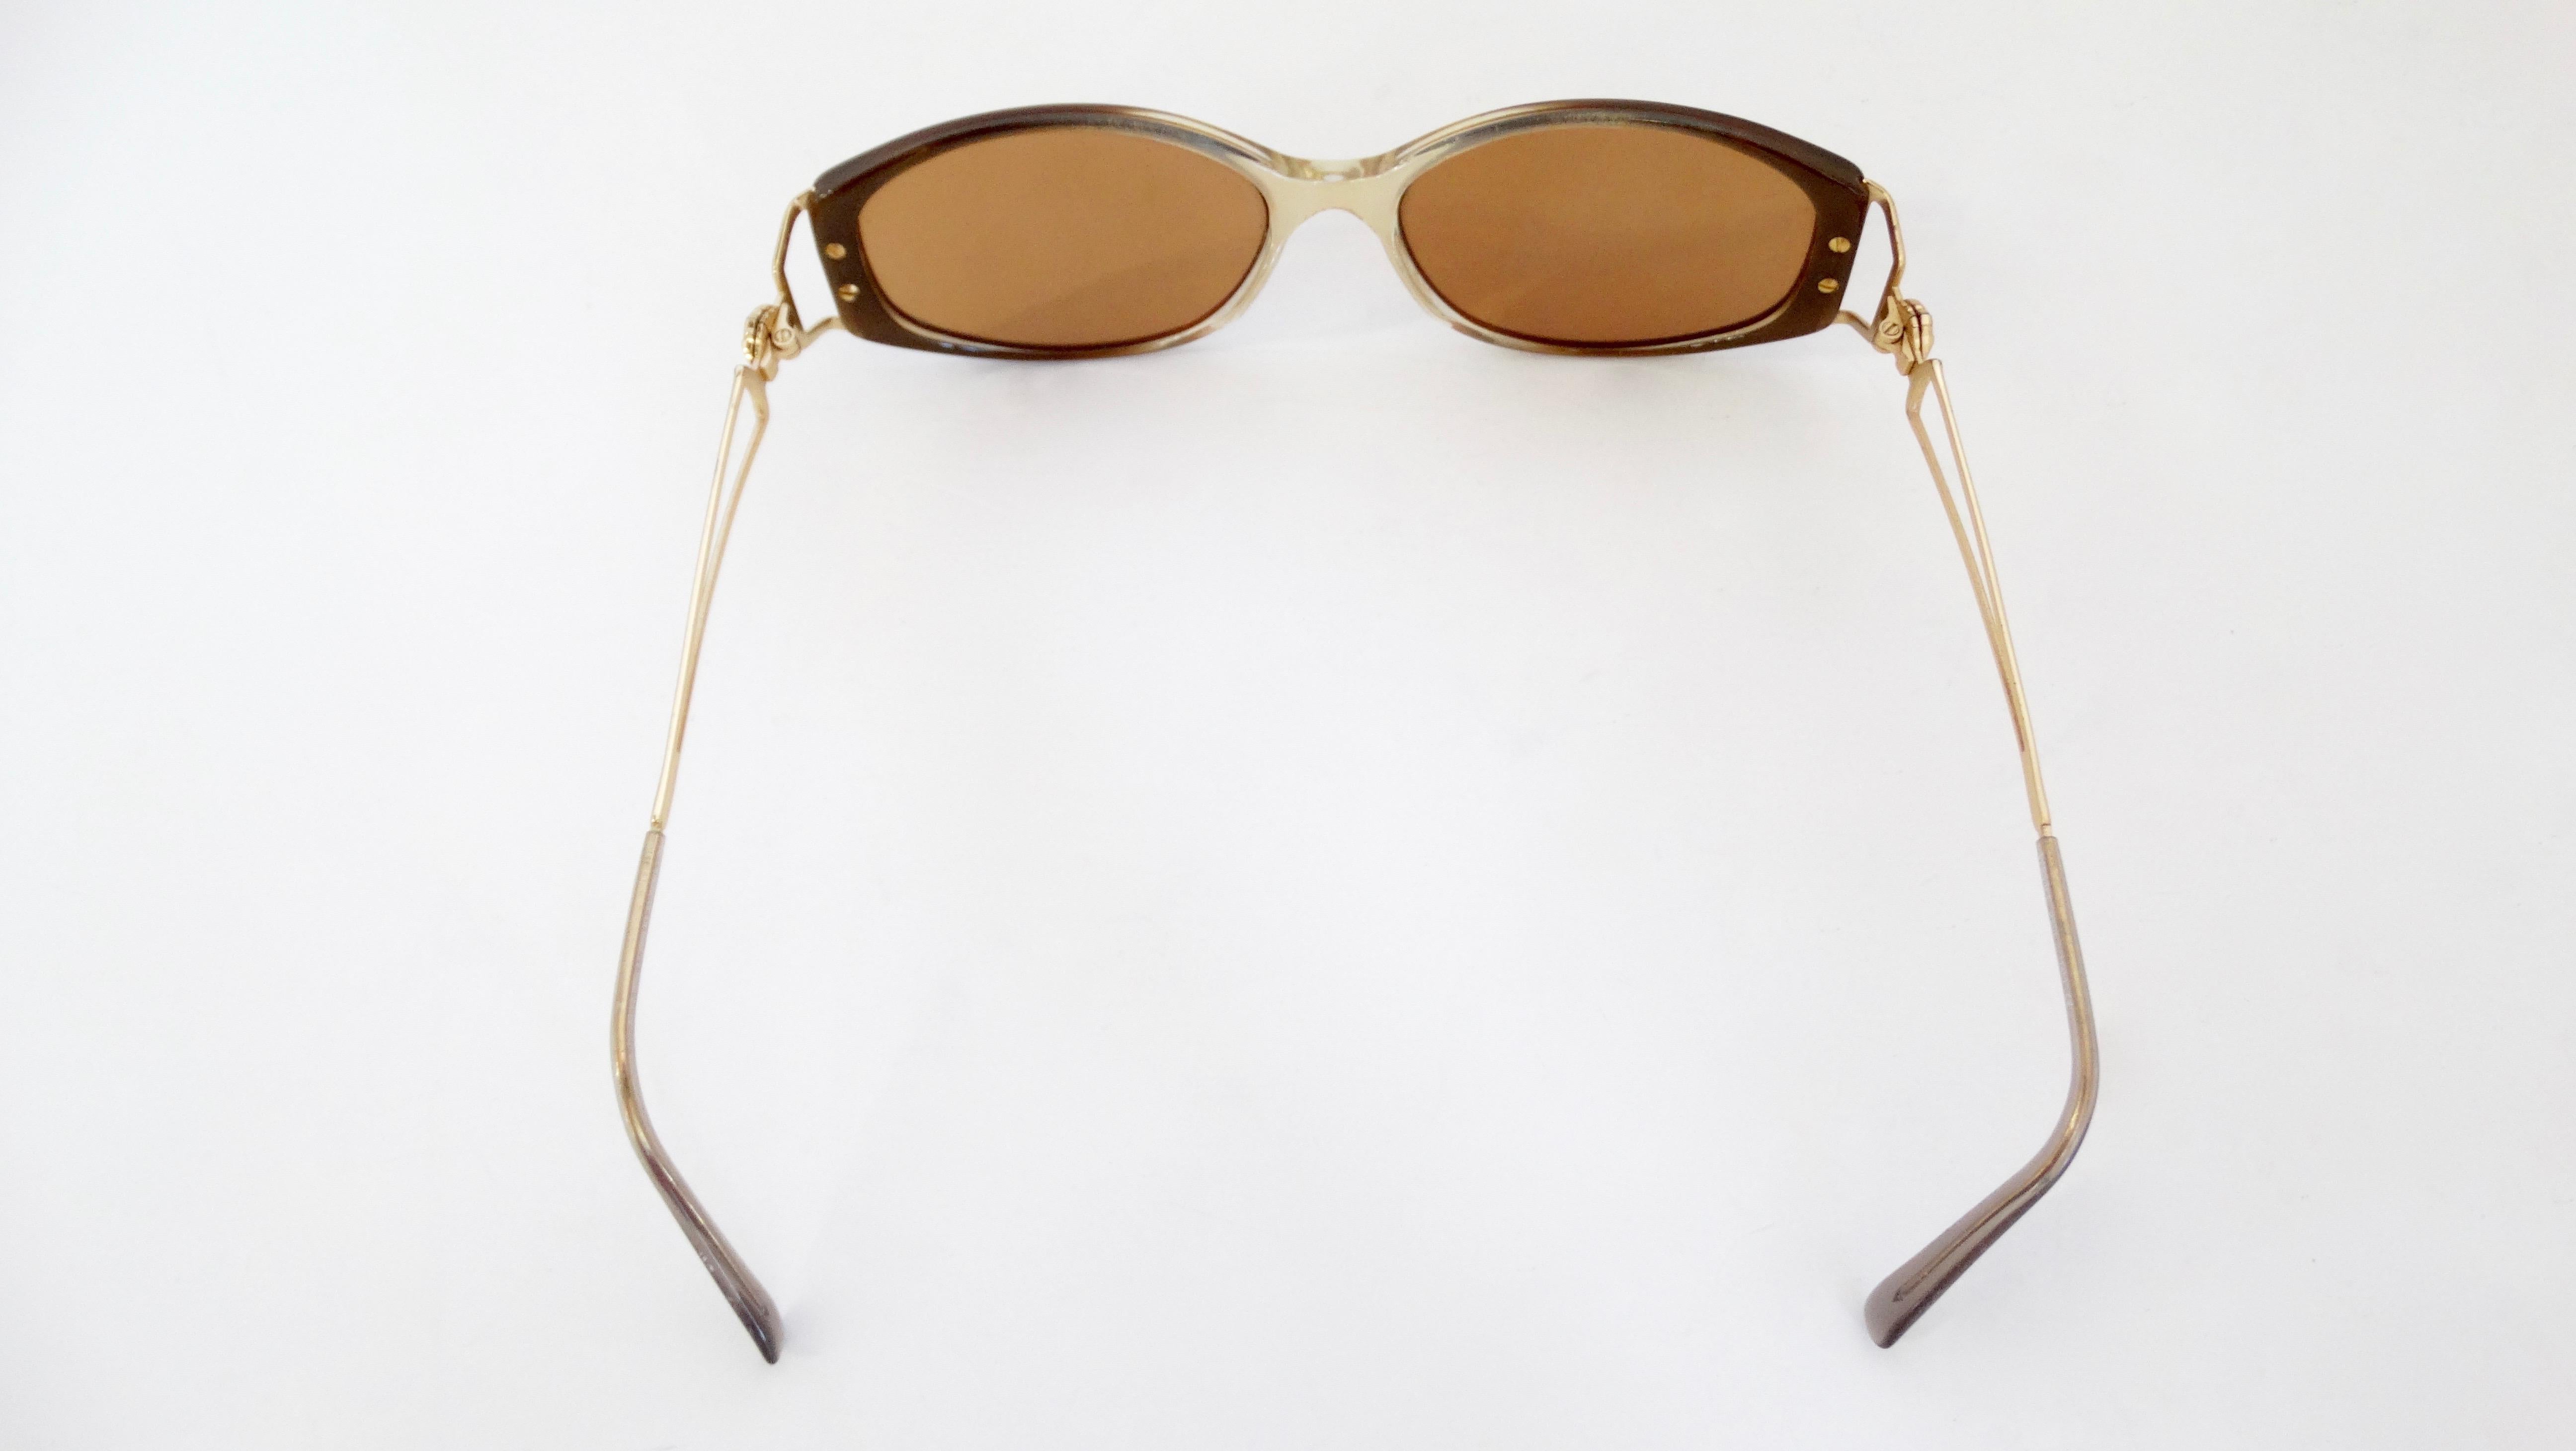 Gianni Versace 1990s Gradient Frame Sunglasses  In Good Condition For Sale In Scottsdale, AZ